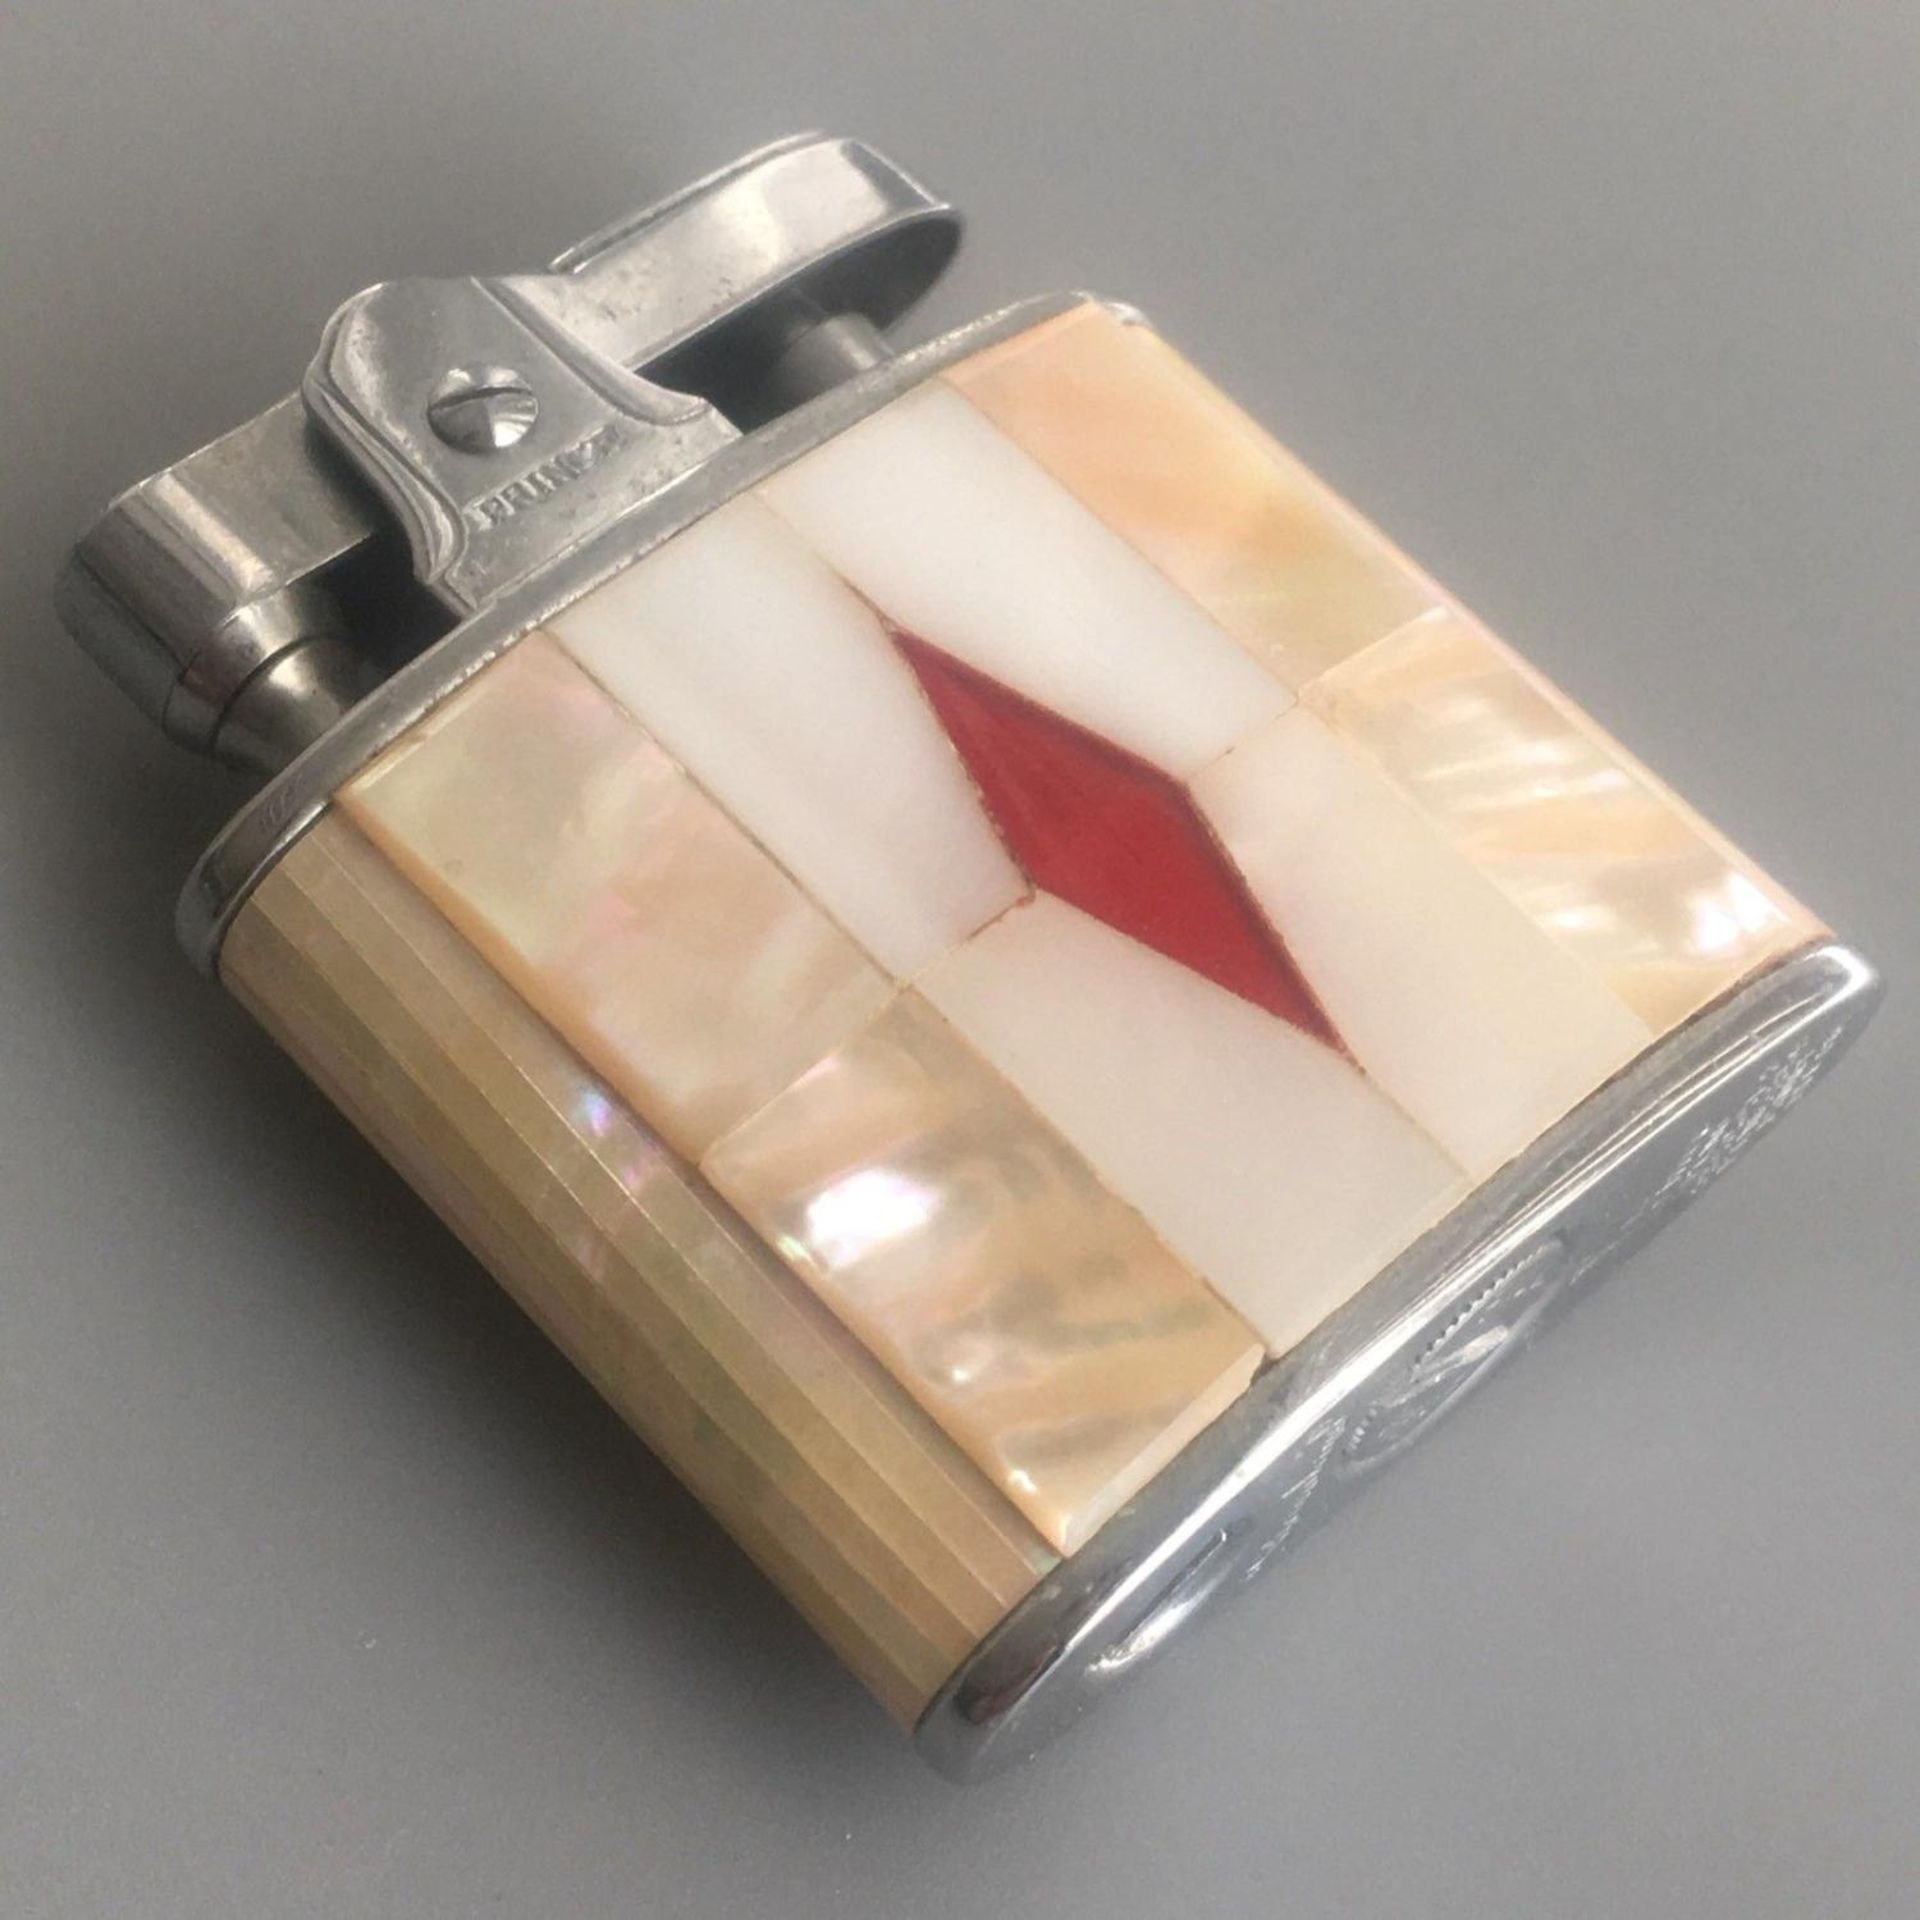 Vintage Mother of Pearl Lighter "Standard" by Prince - Good Condition - Working